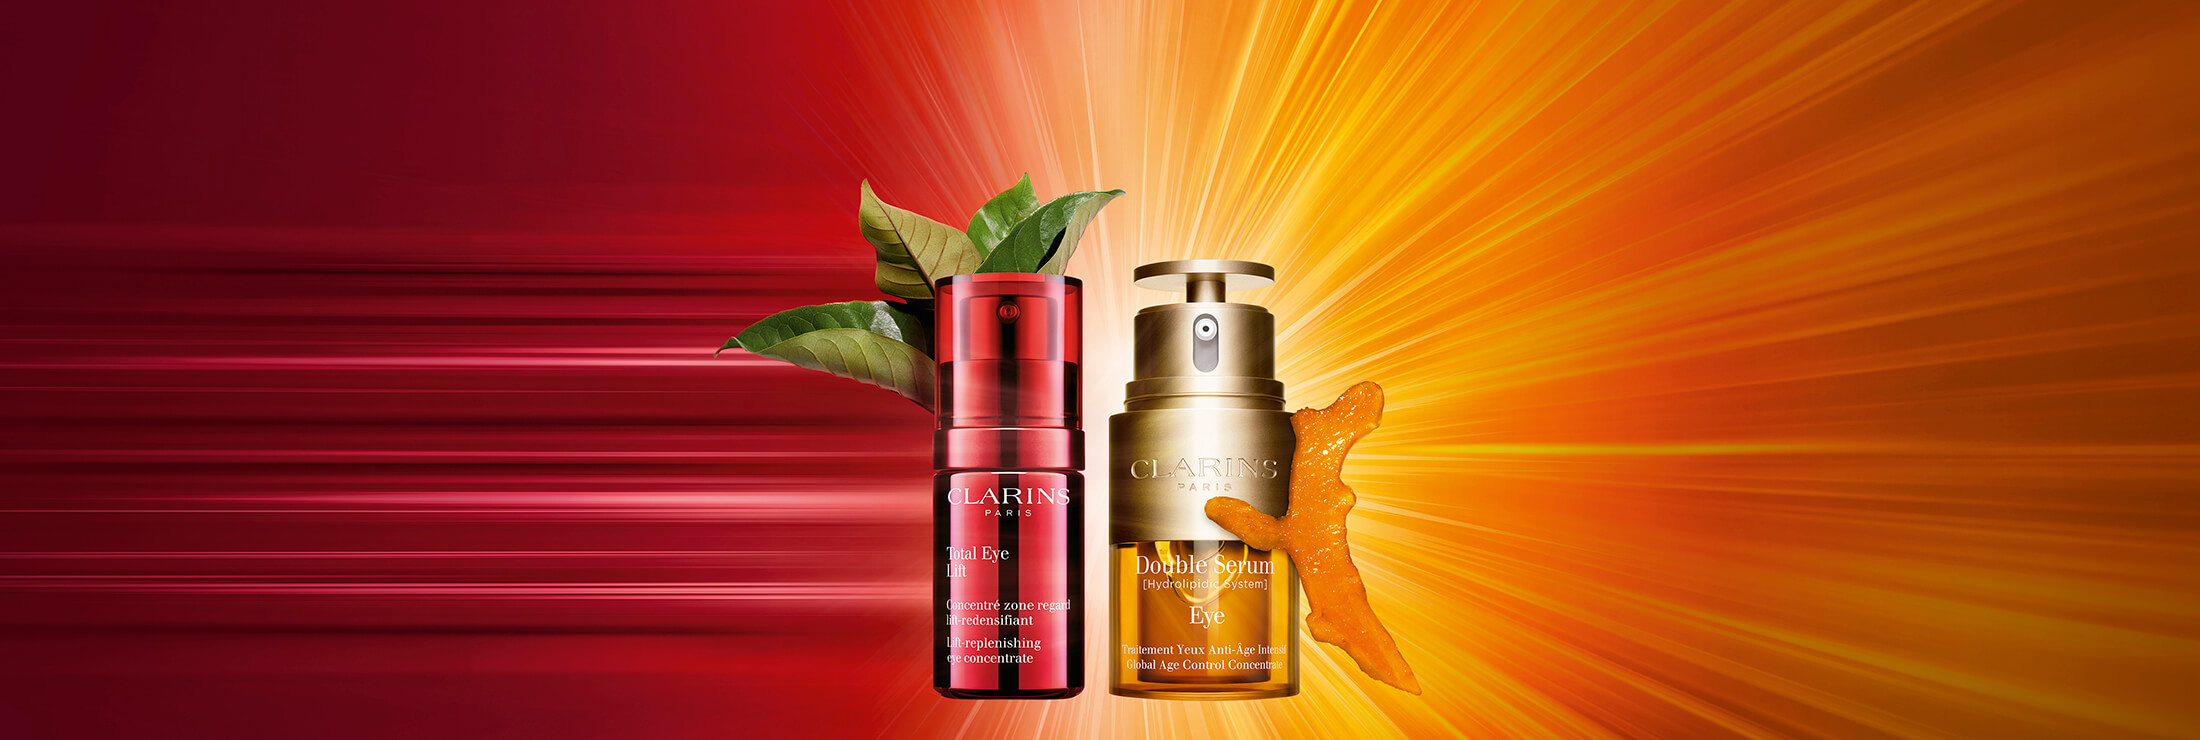 Background Visual, Total Eye Lift: Smooths fine lines, wrinkles & crow's feet | Clarins Singapore, & Double Serum Eye: Best-selling 2-in-1 eye care | Clarins Singapore